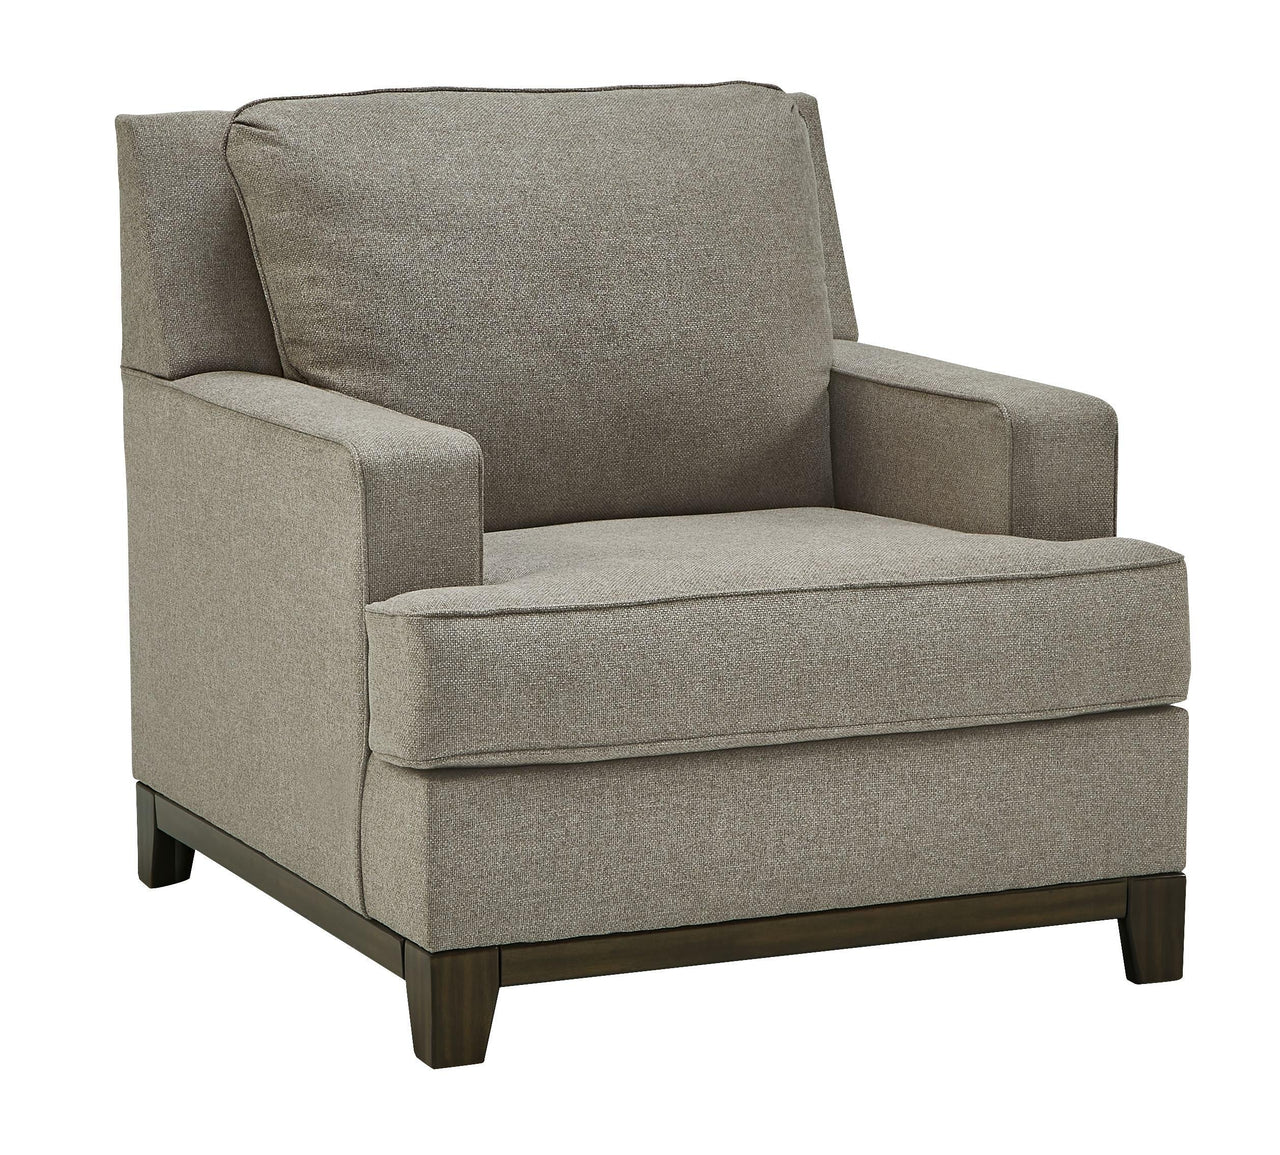 Kaywood - Granite - Chair Tony's Home Furnishings Furniture. Beds. Dressers. Sofas.